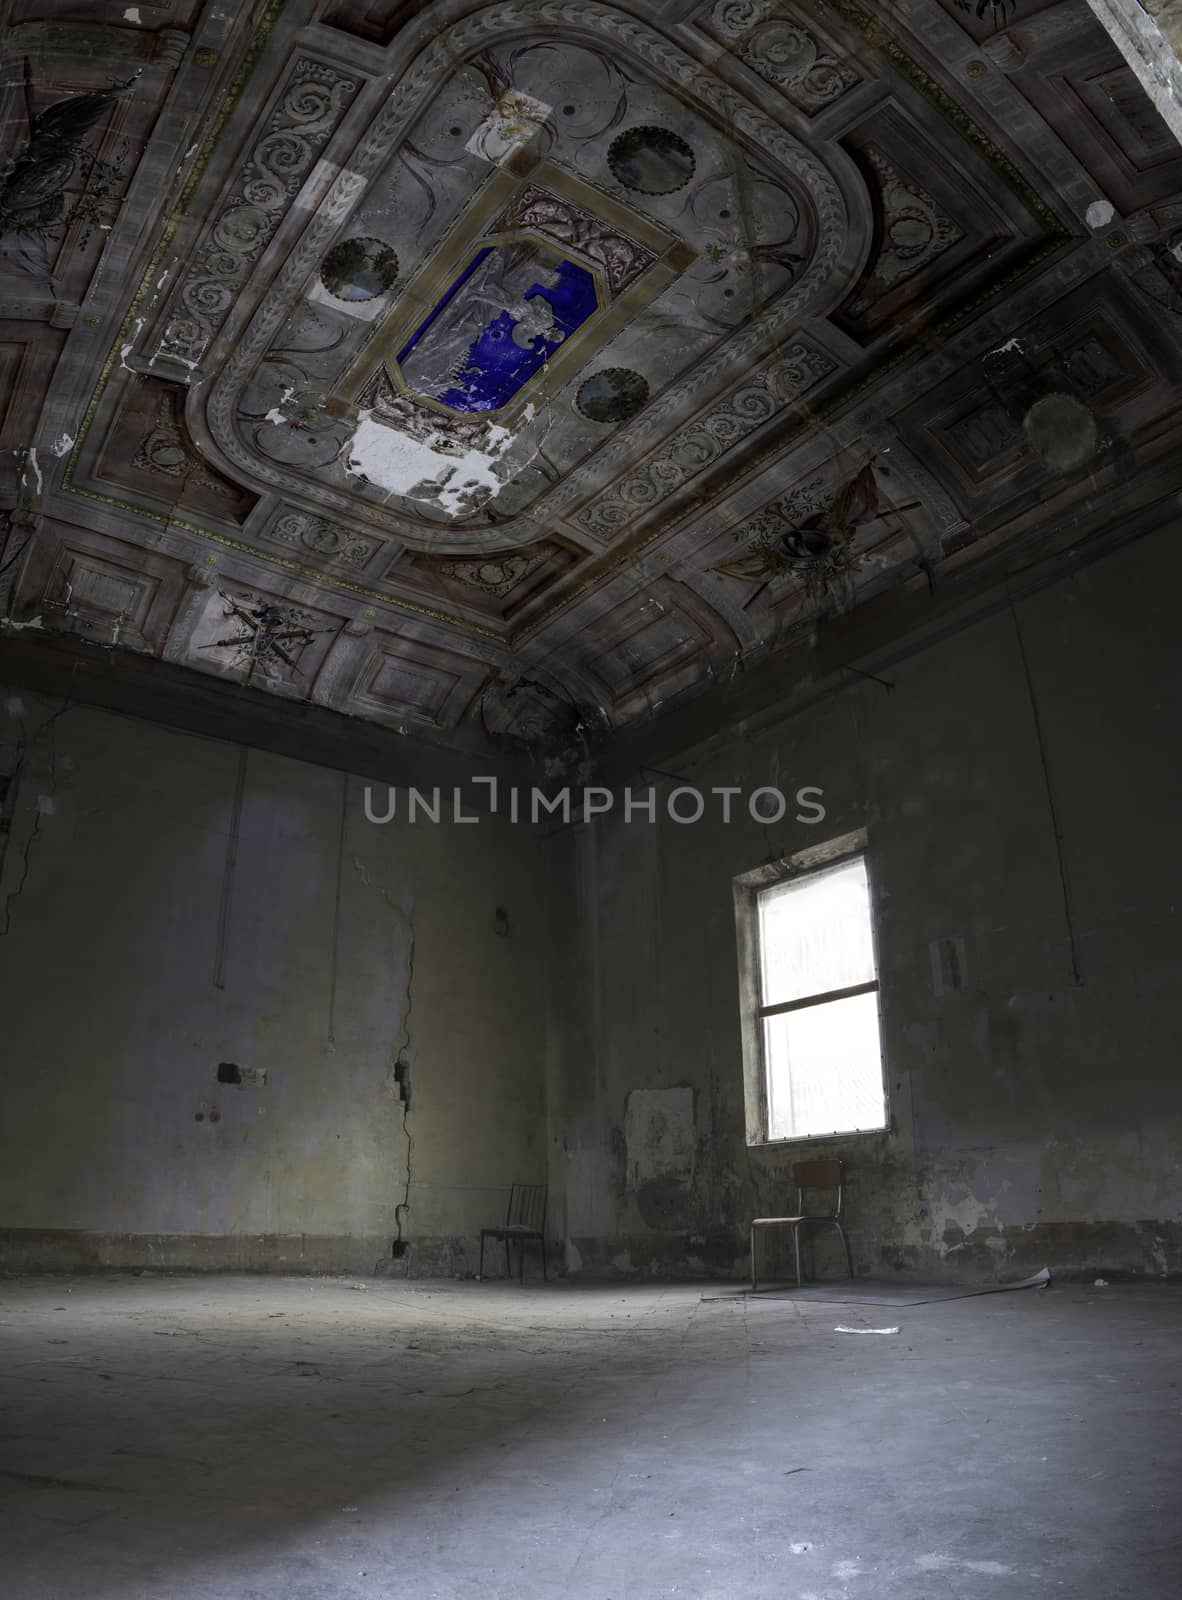 Interiors of an abandoned madhouse in the downtown by enrico.lapponi